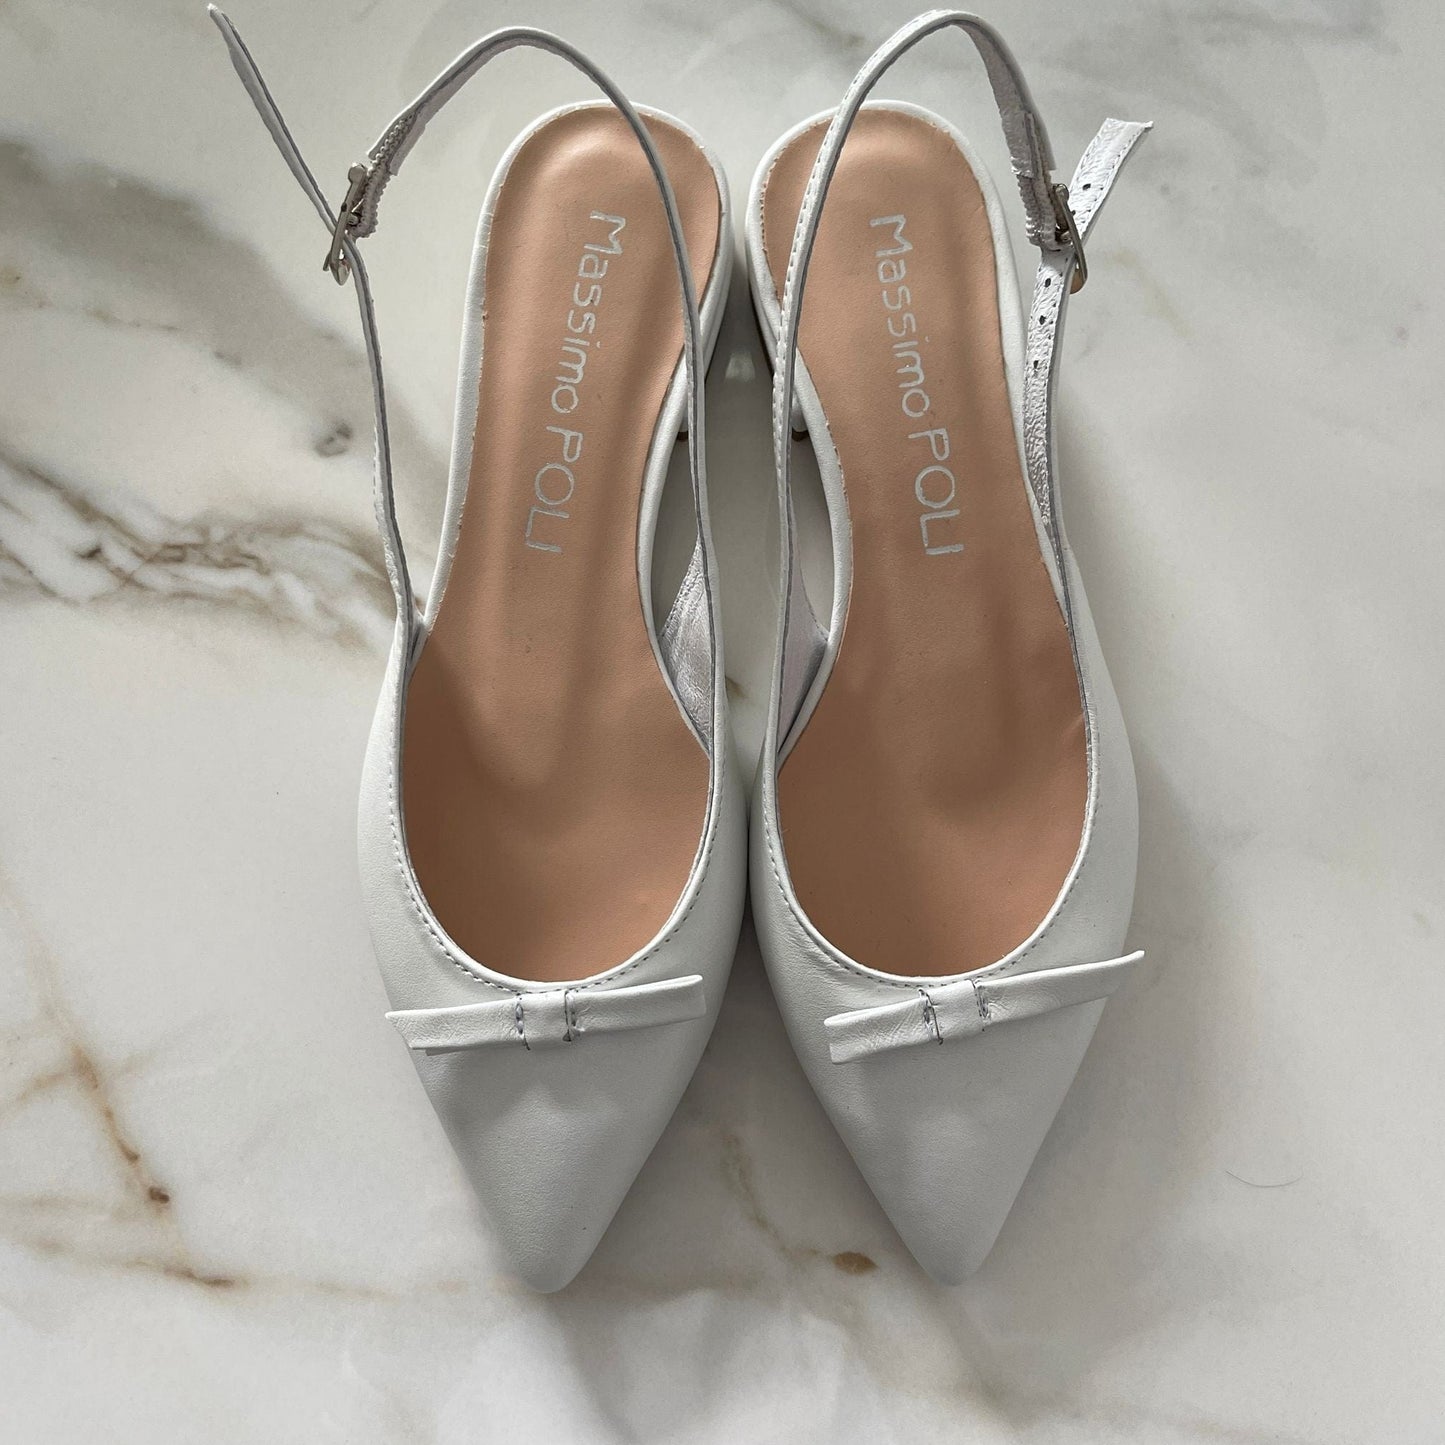 Pointed toe ballerina shoes in white leather